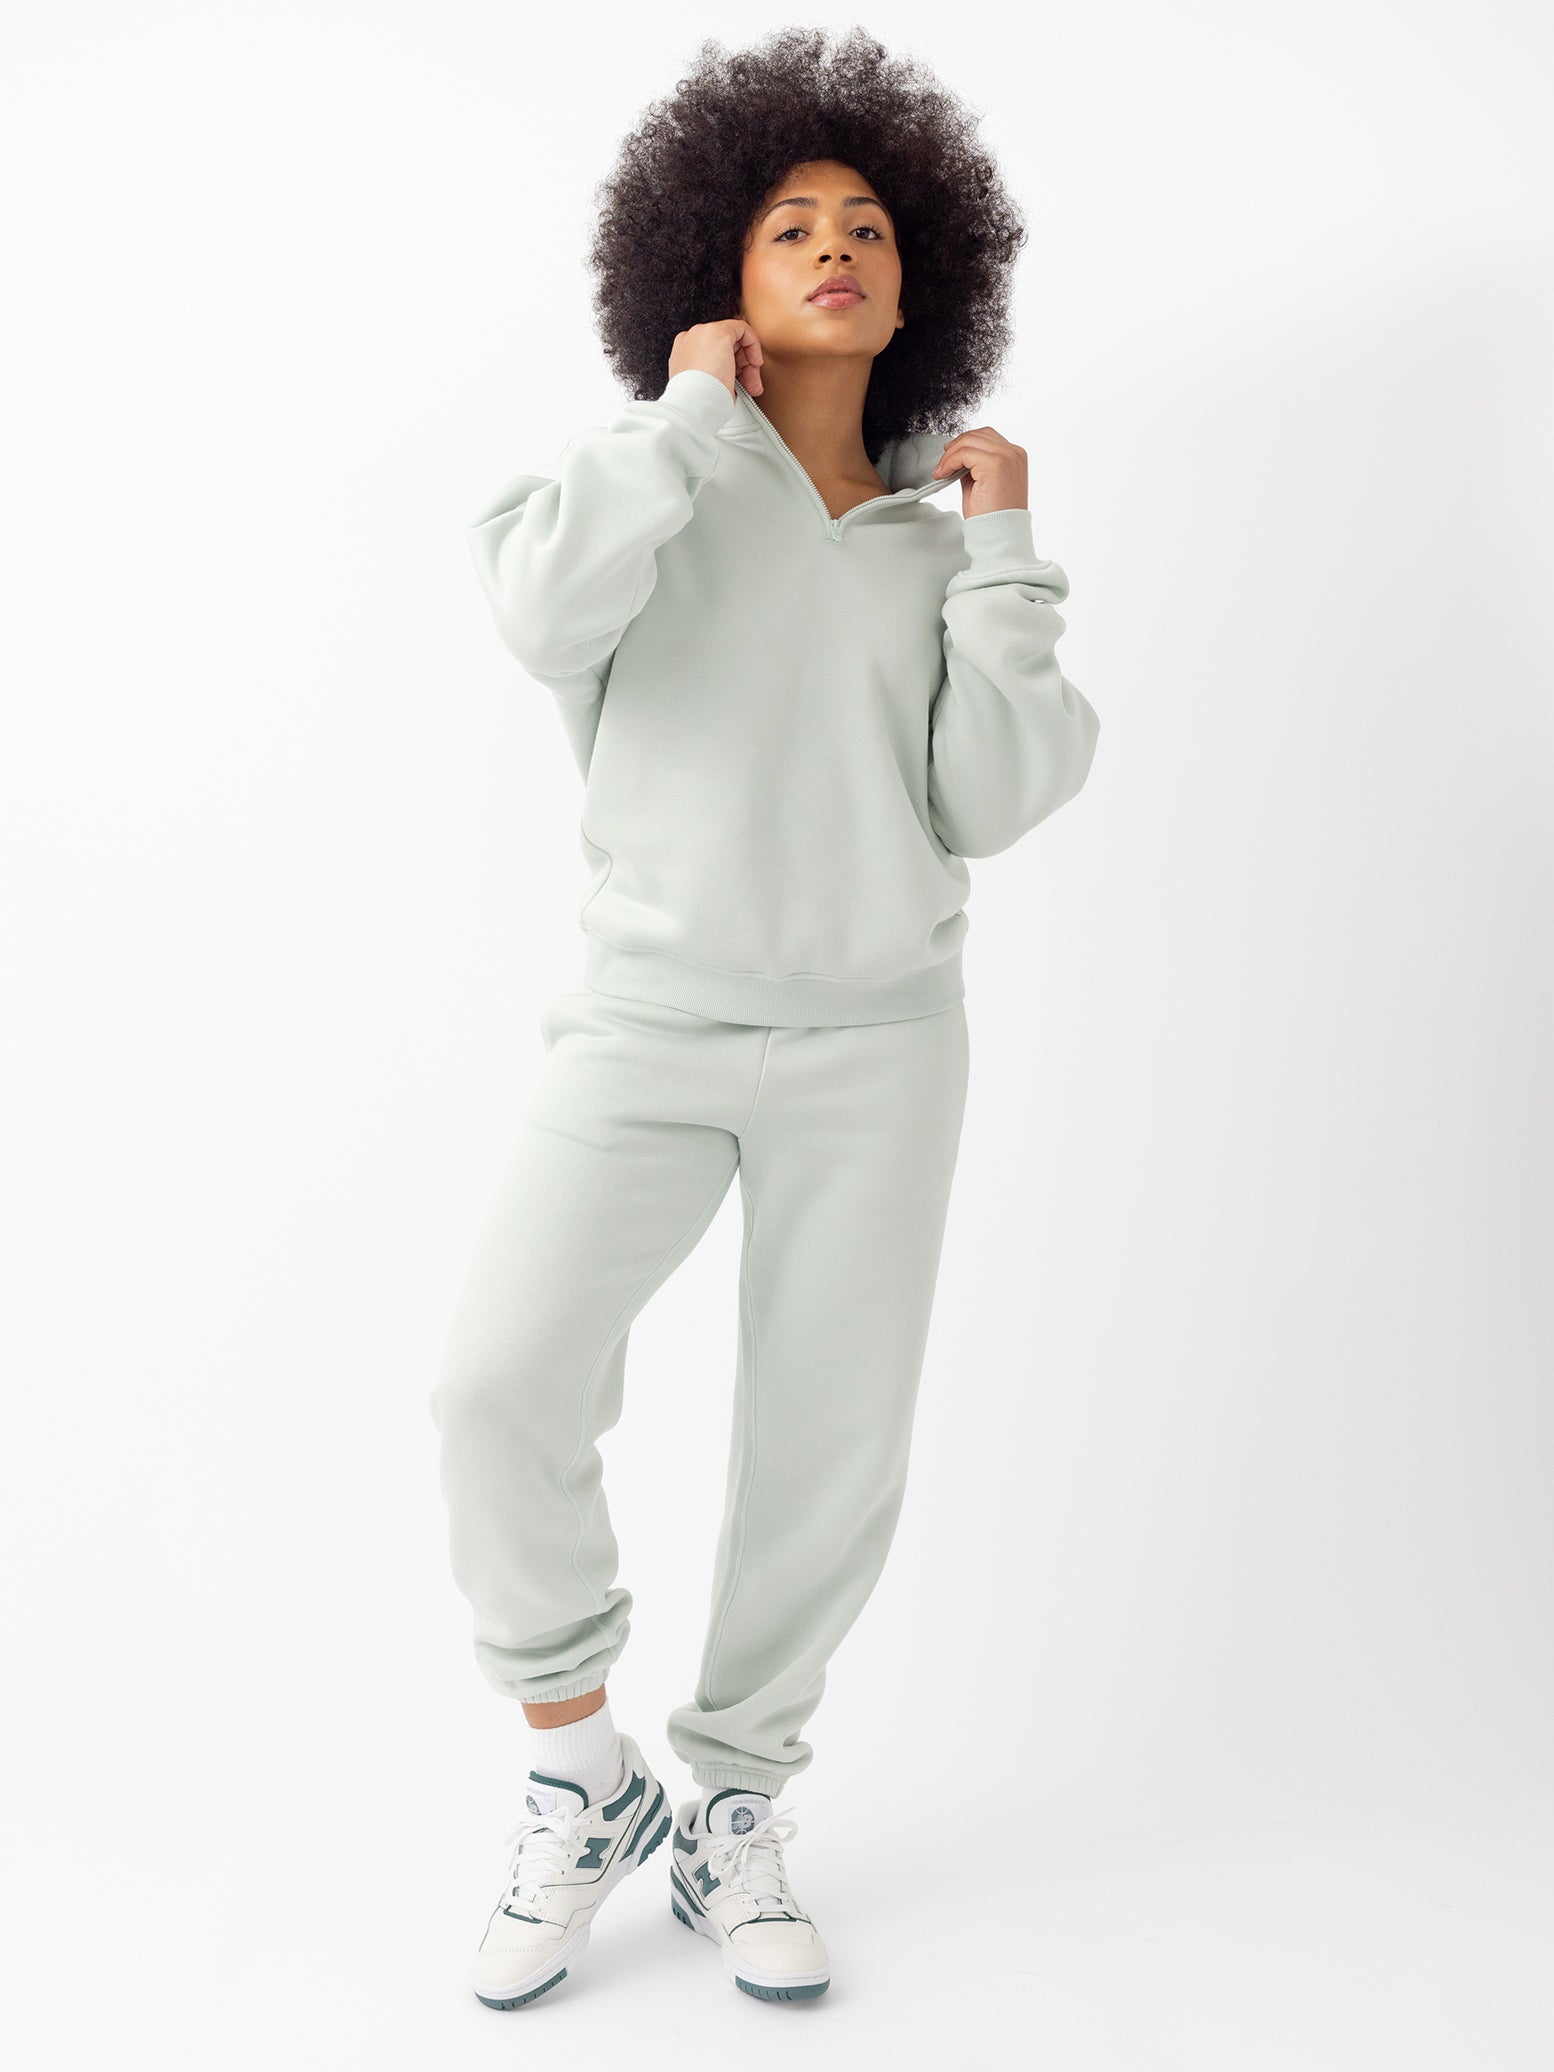 Arctic CityScape Joggers. The Joggers are being worn by a female model. The photo is taken with the models hand by the pocket of the joggers. The back ground is a crisp white background. 